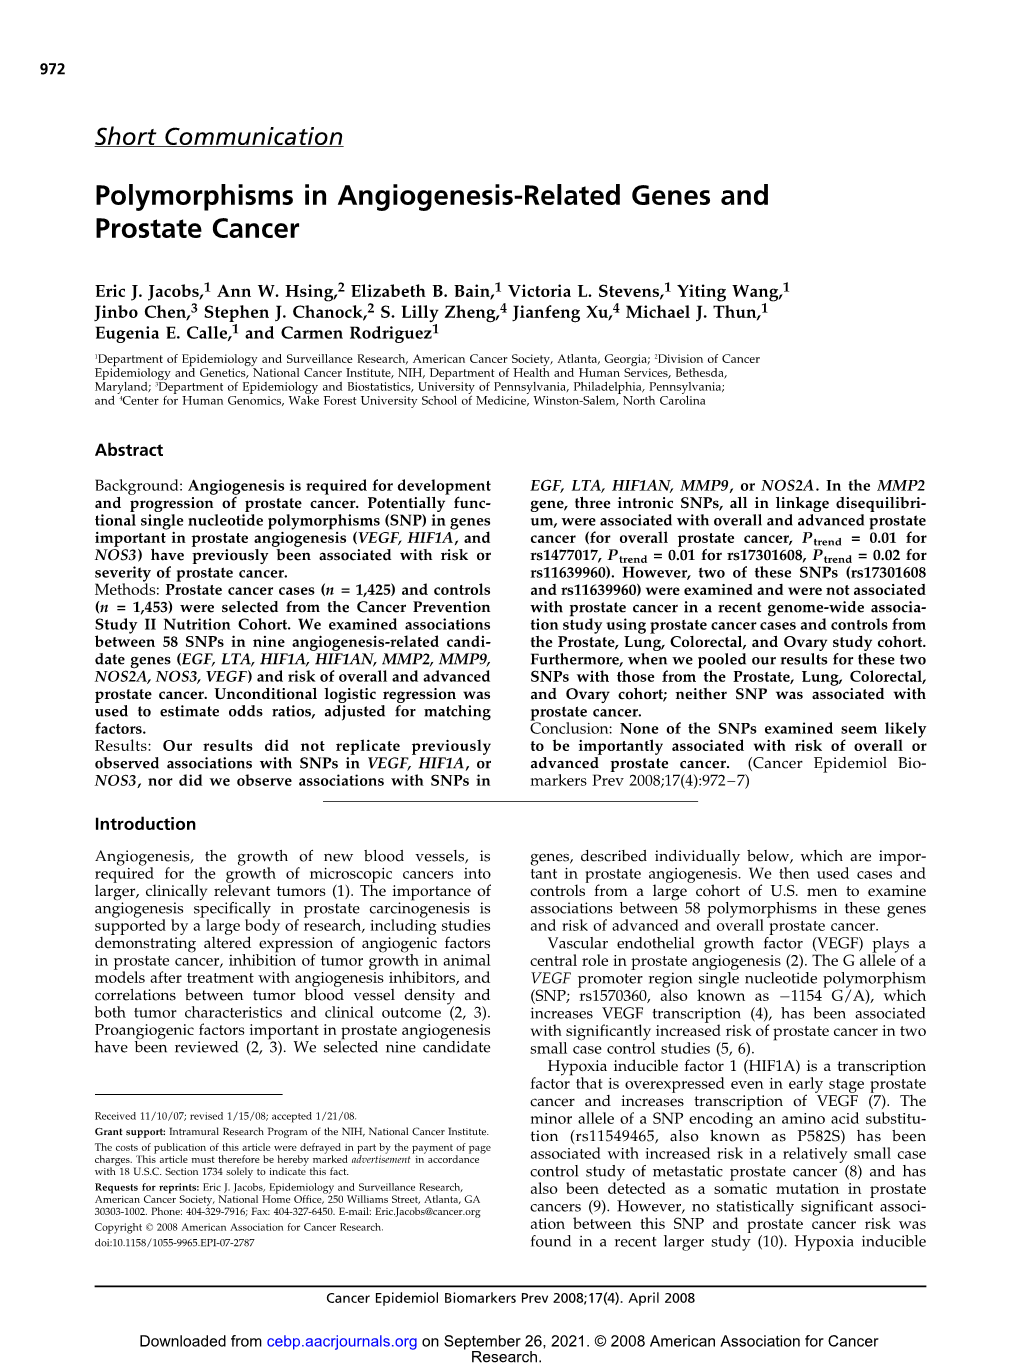 Polymorphisms in Angiogenesis-Related Genes and Prostate Cancer